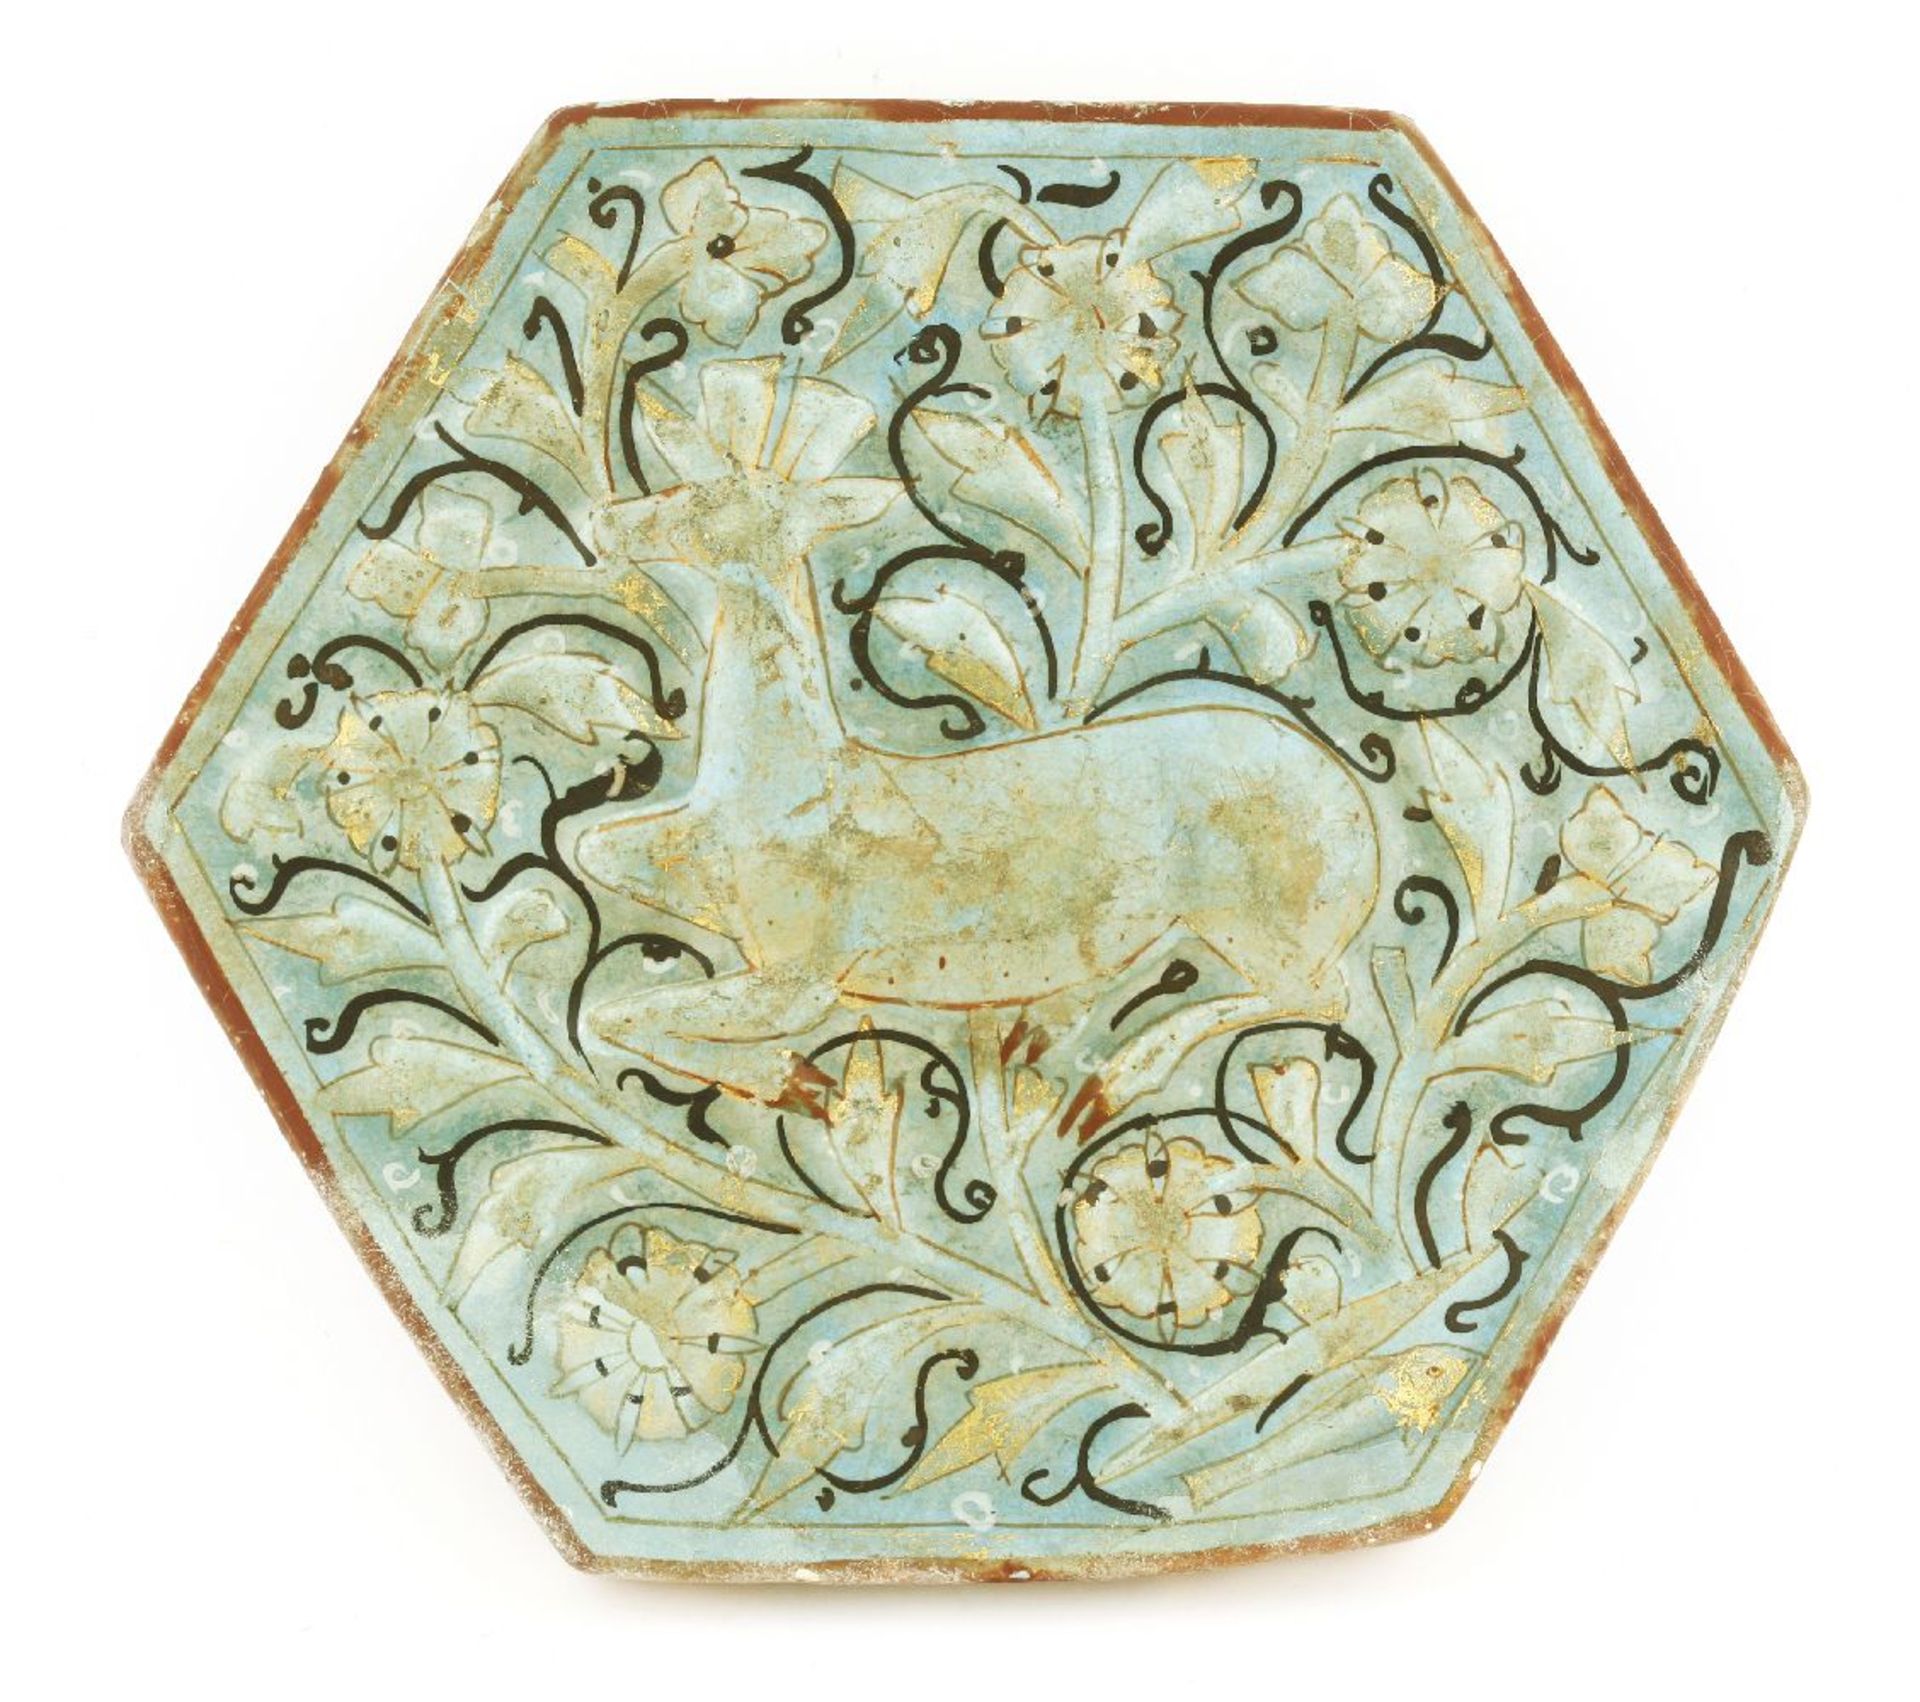 A rare moulded pottery tile,early 14th century, Kashan, of hexagonal form, turquoise-glazed and